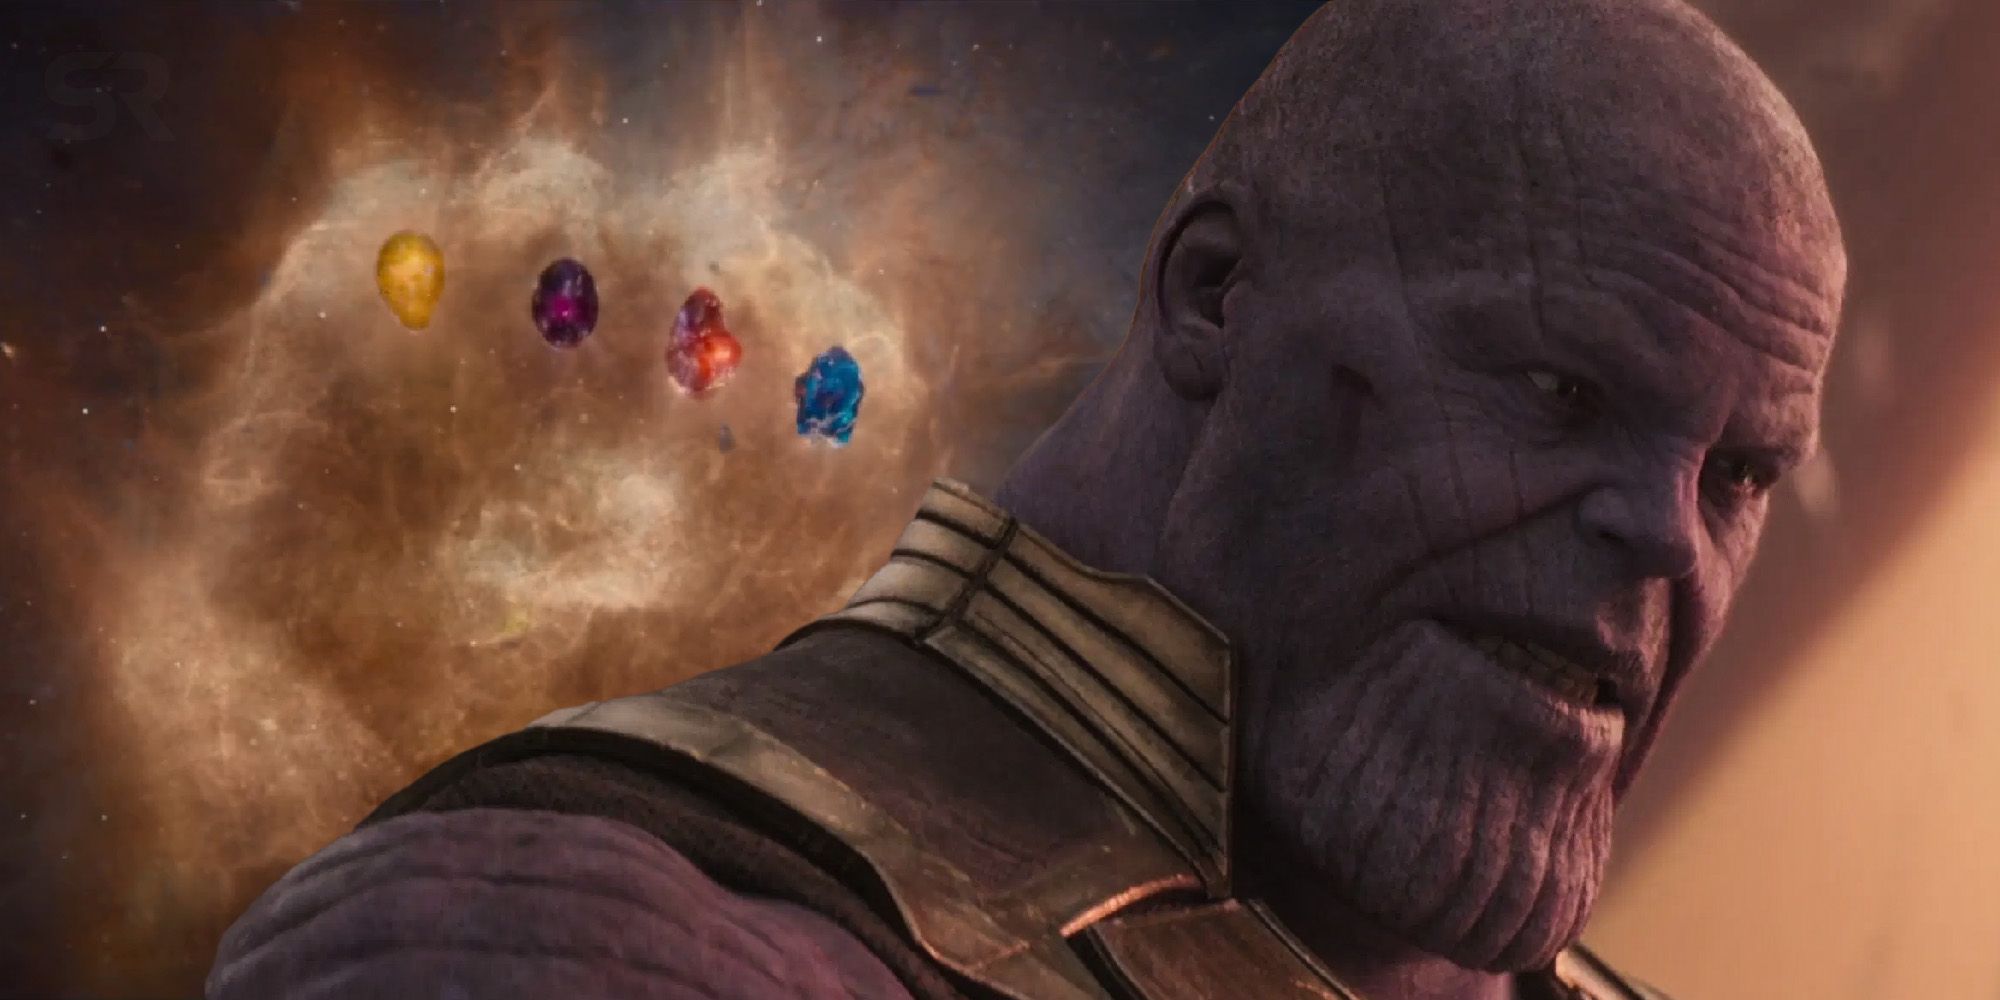 A hilarious new Marvel-themed TikTok floats the idea that Thanos could have...